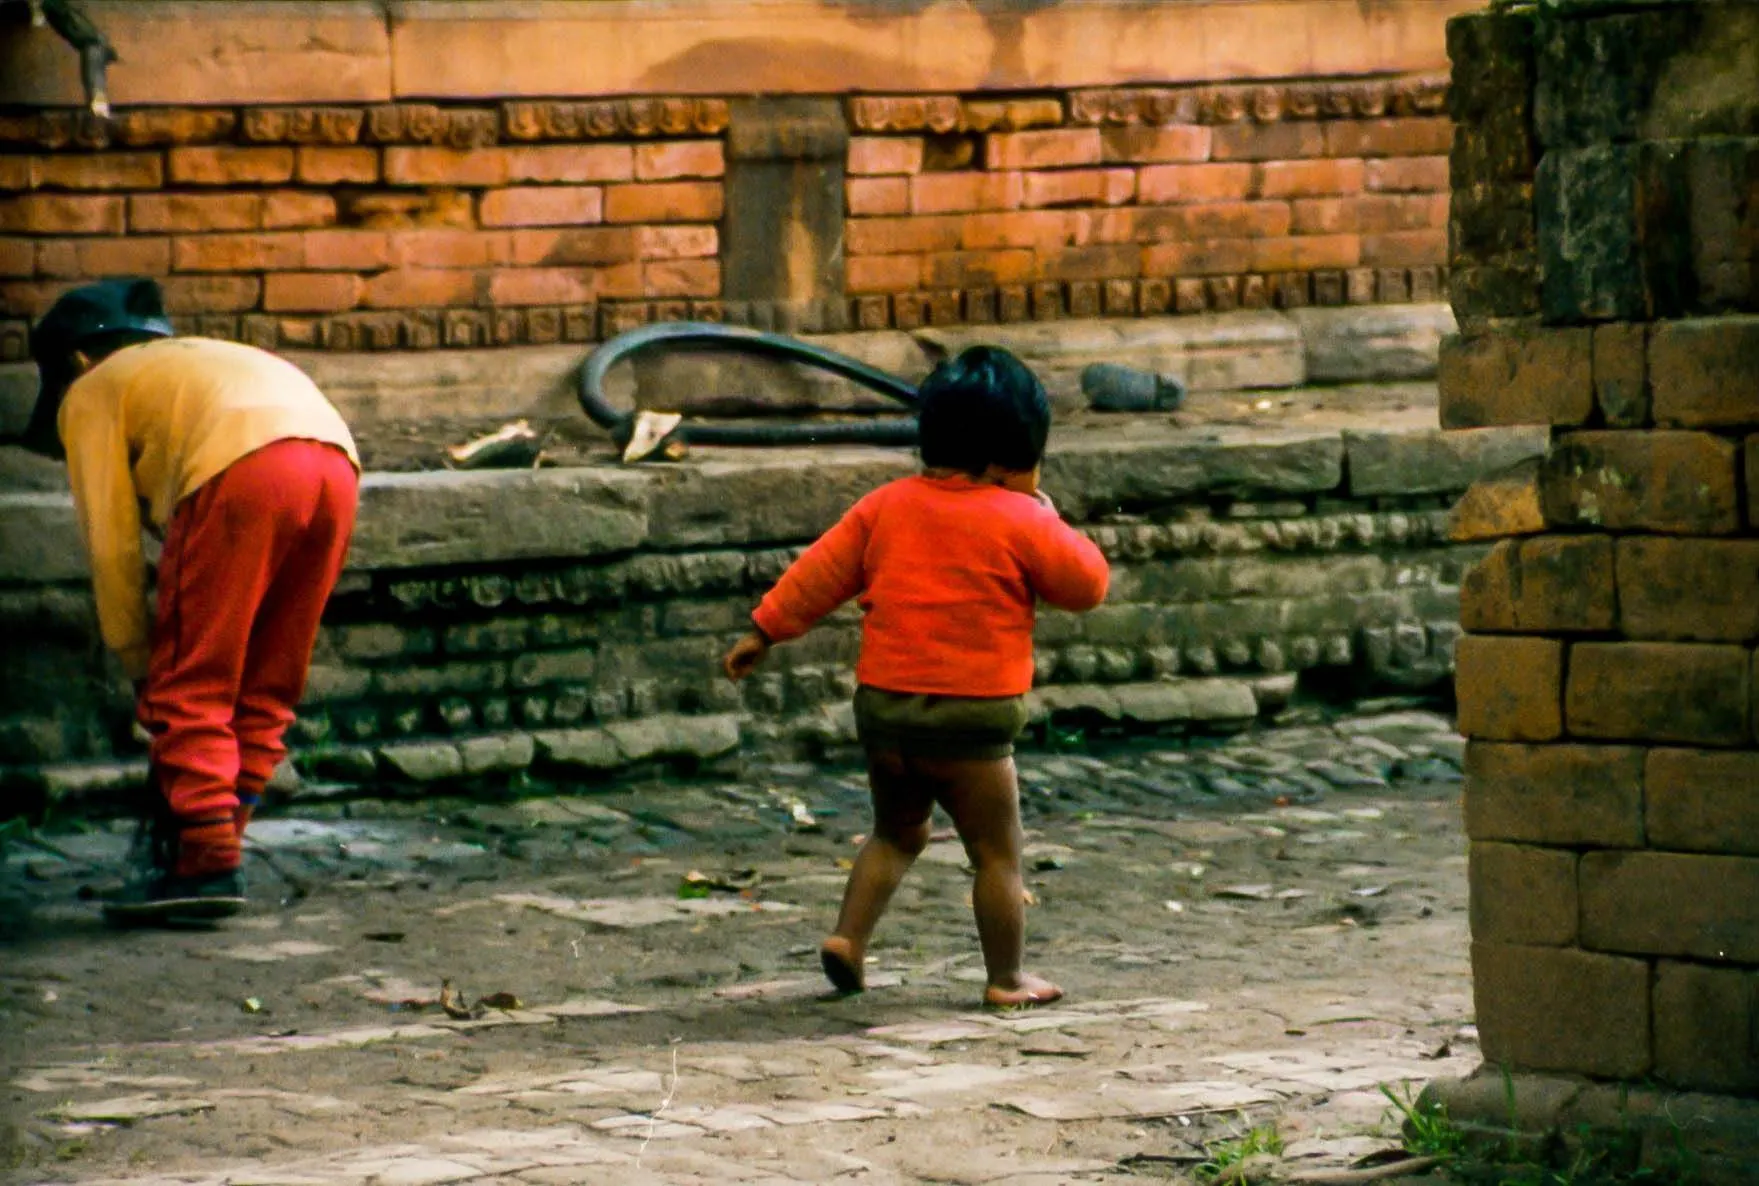 A child wandering the streets of Kathmandu during the Nepal Civil War